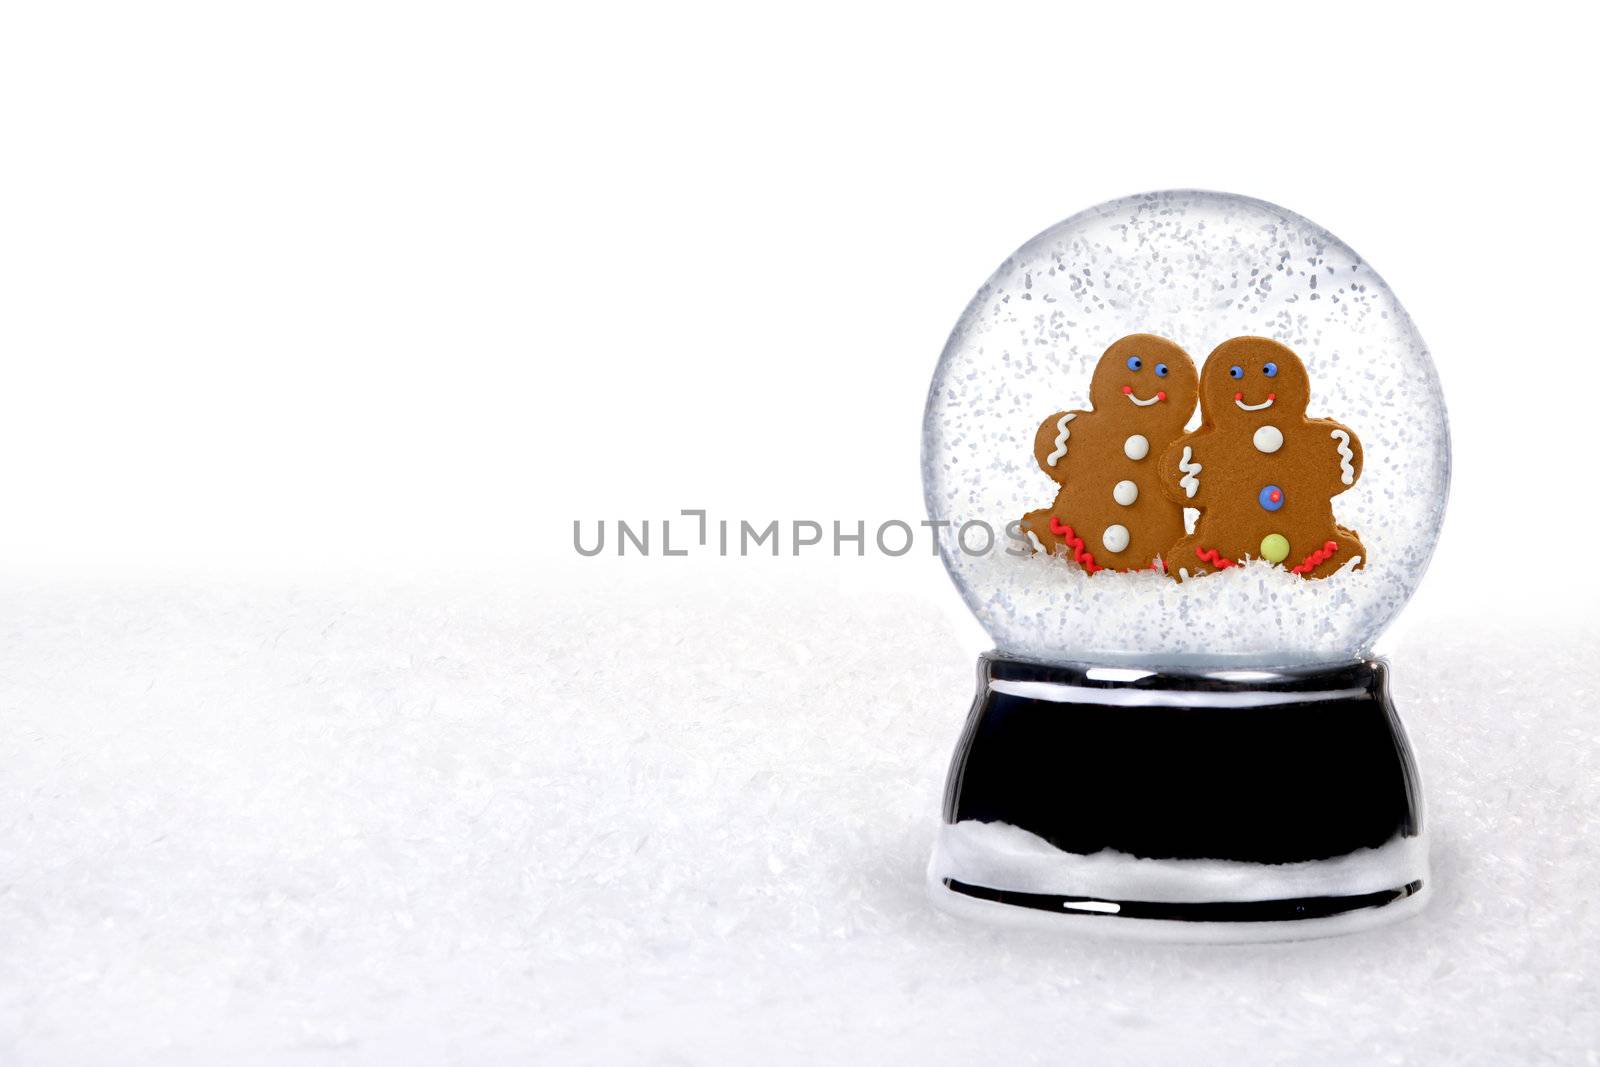 2 Happy Gingerbread People Inside a Snowglobe in Love on Christmas Holiday